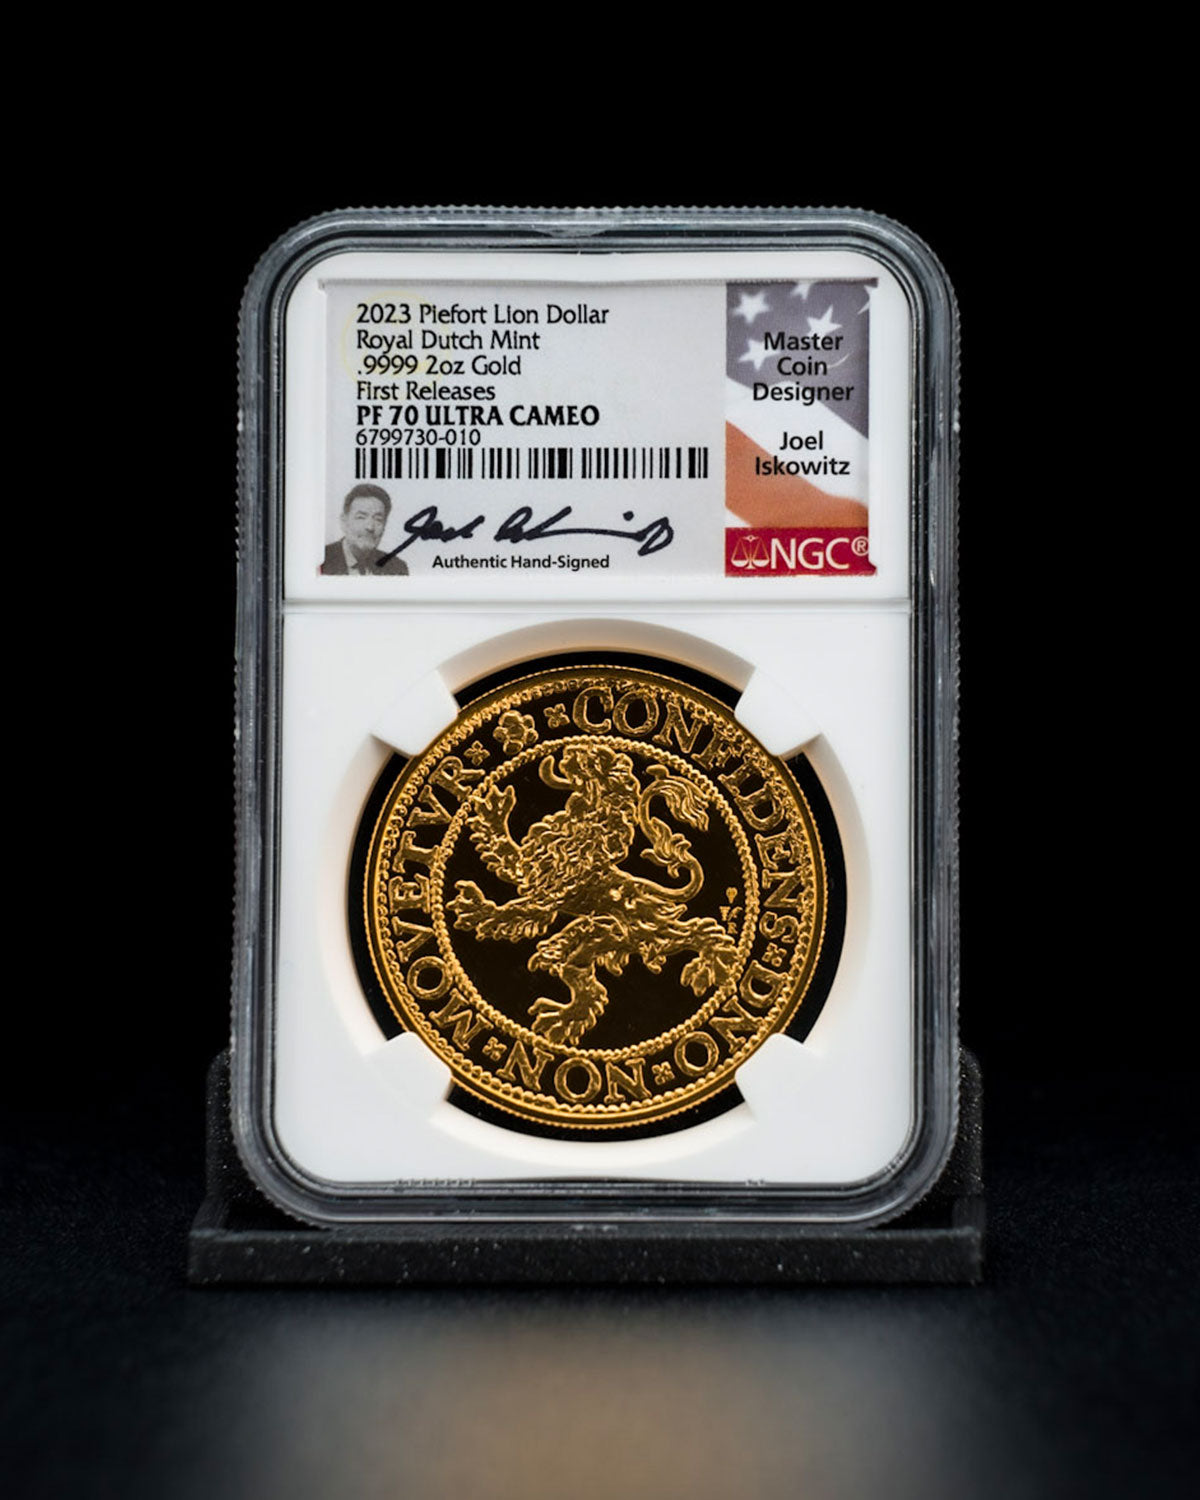 2023 Piefort Lion Dollar Royal Dutch Mint | First Releases PF70 Ultra Cameo | Joel Iskowitz Autographed